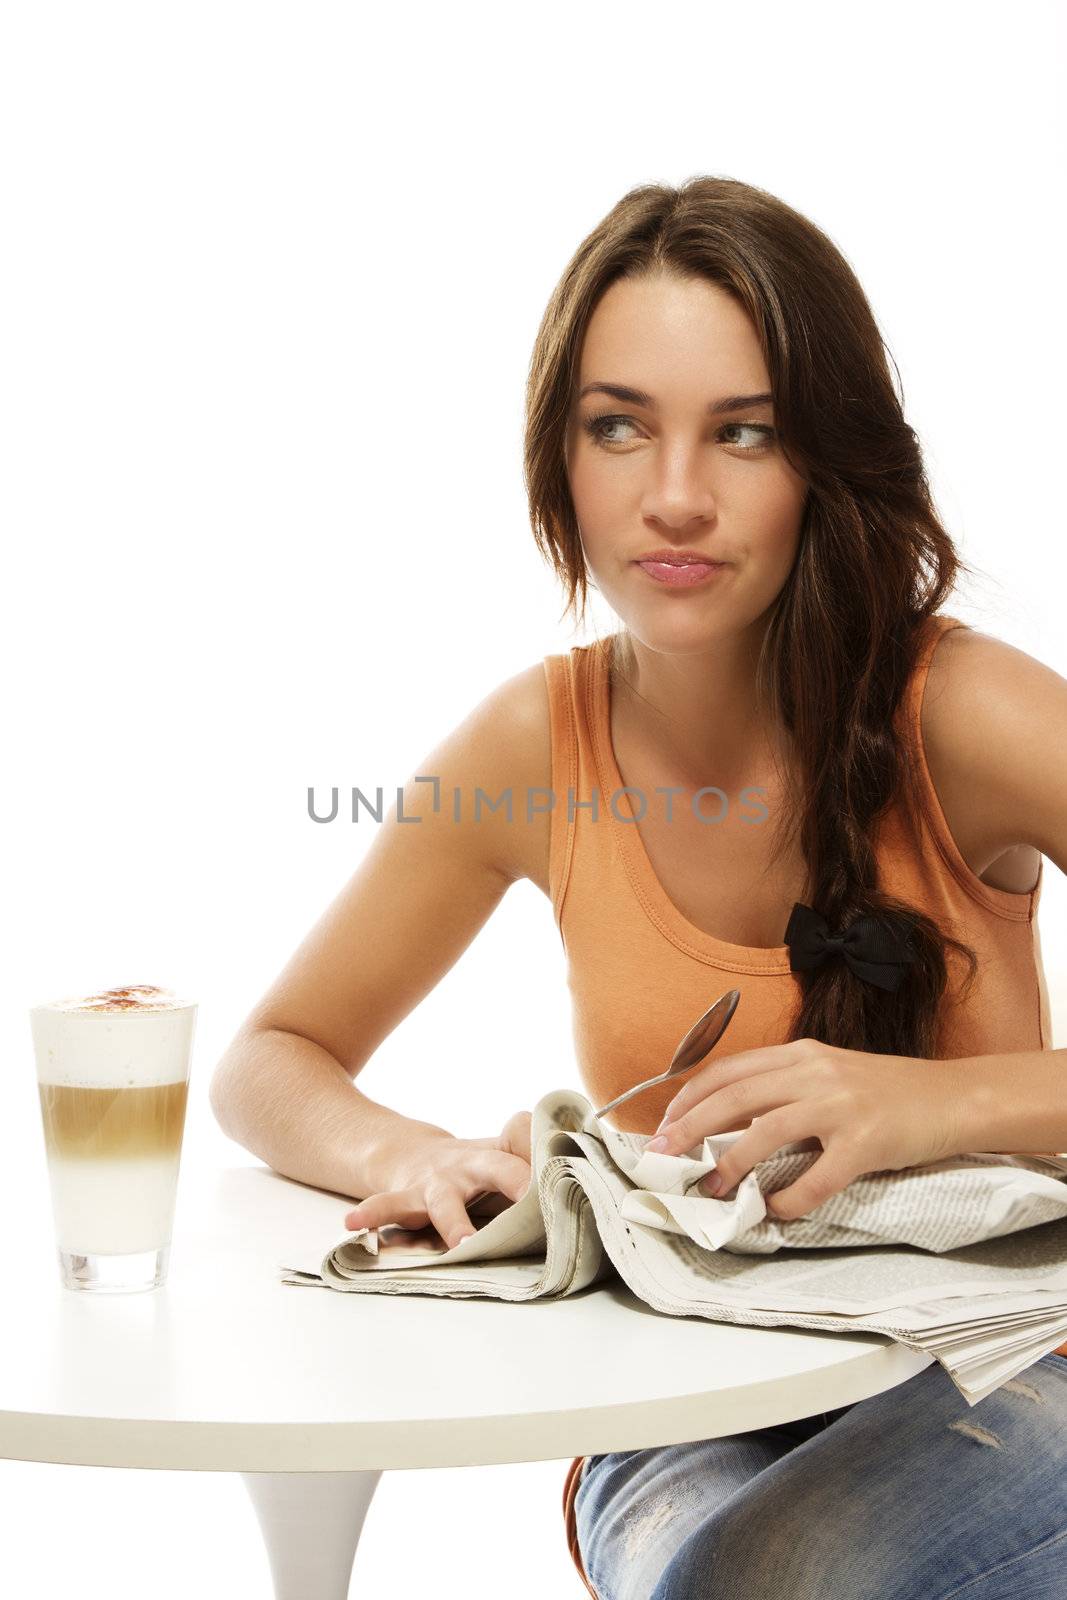 upset young woman with newspaper and latte macchiato at a table on white background